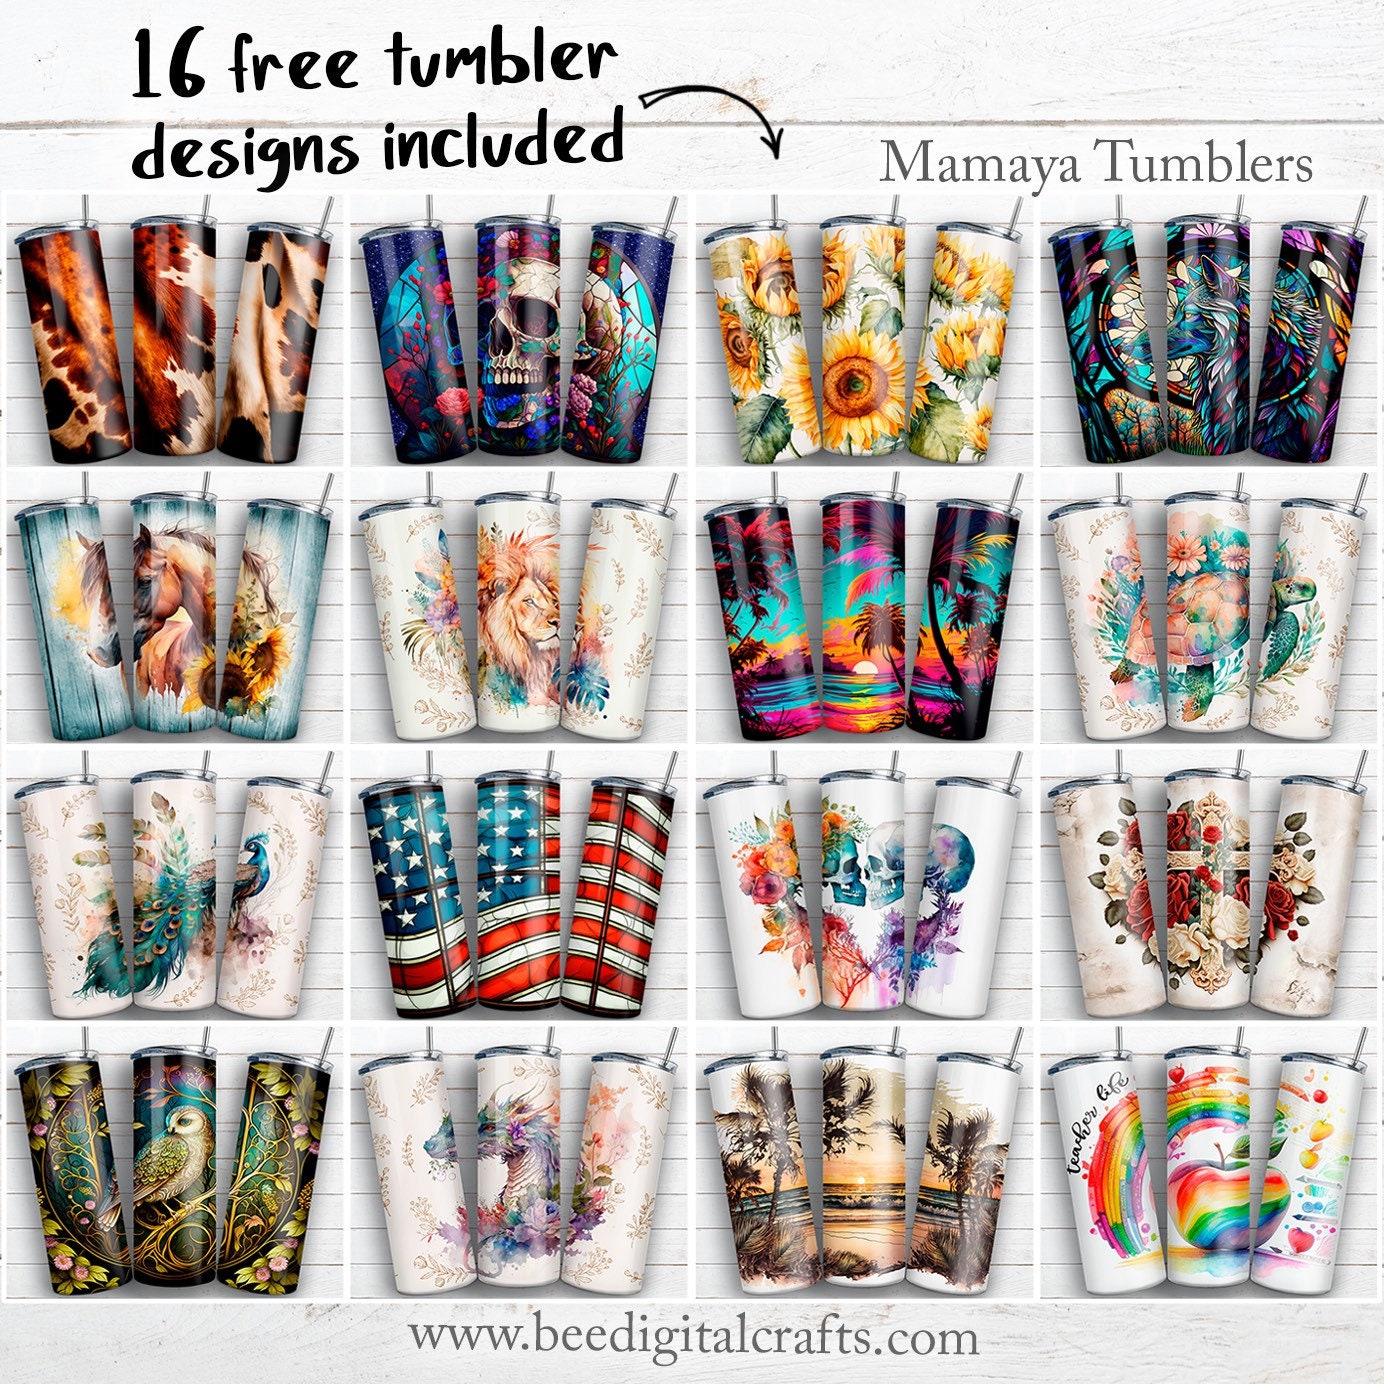 Fall Lake Scene 20 oz Sublimation Tumbler – Designs and Creations